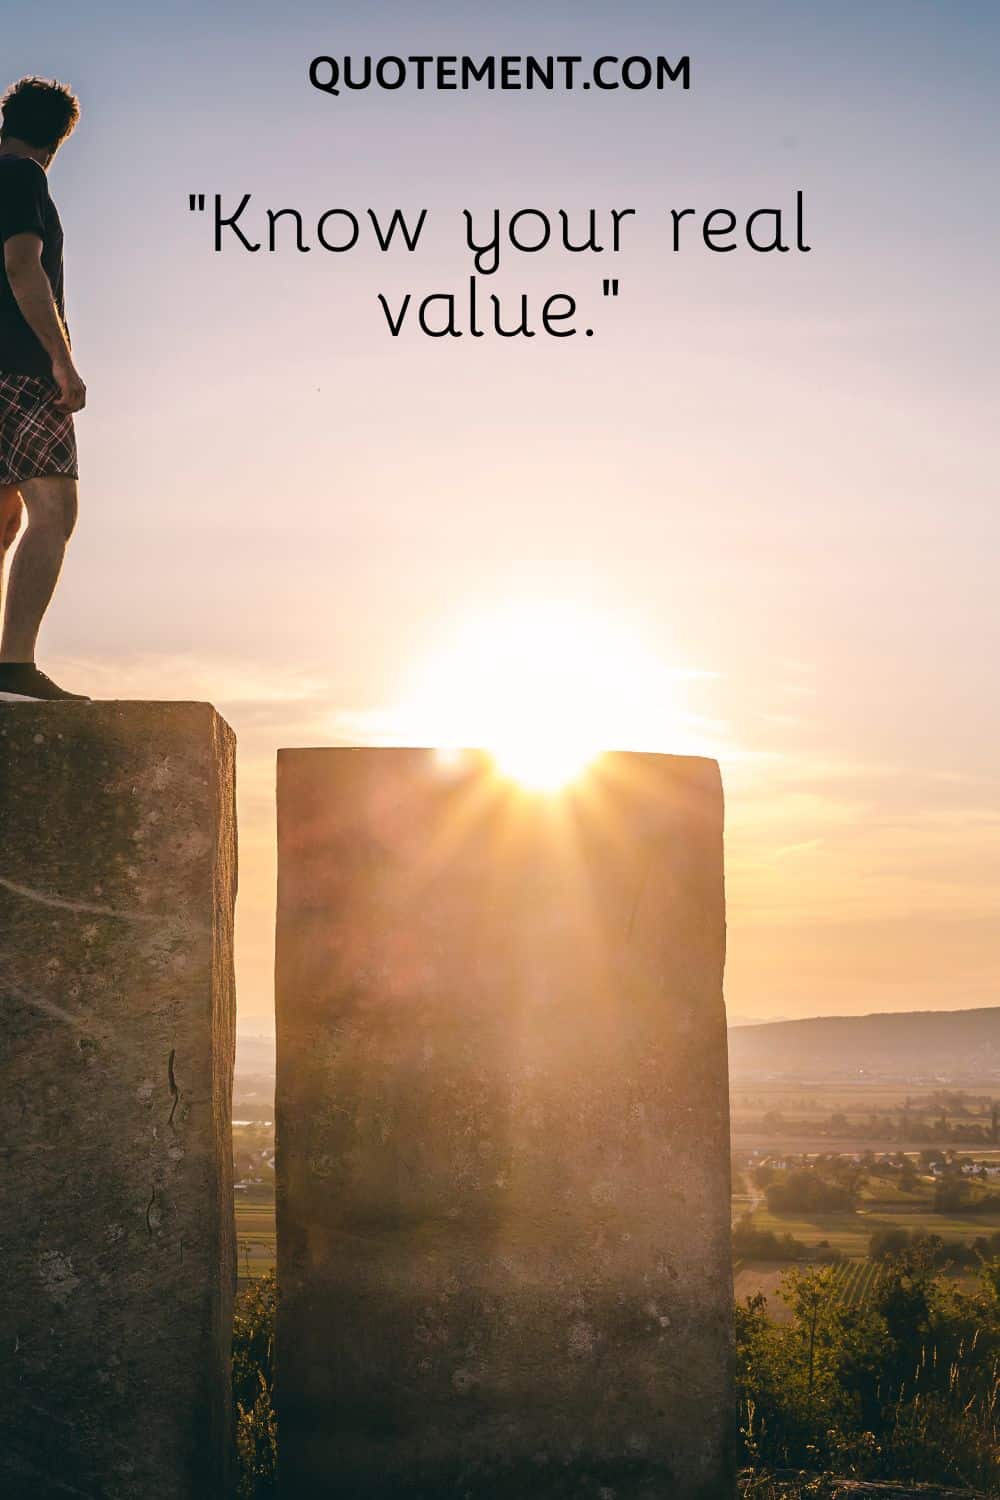 Know your real value